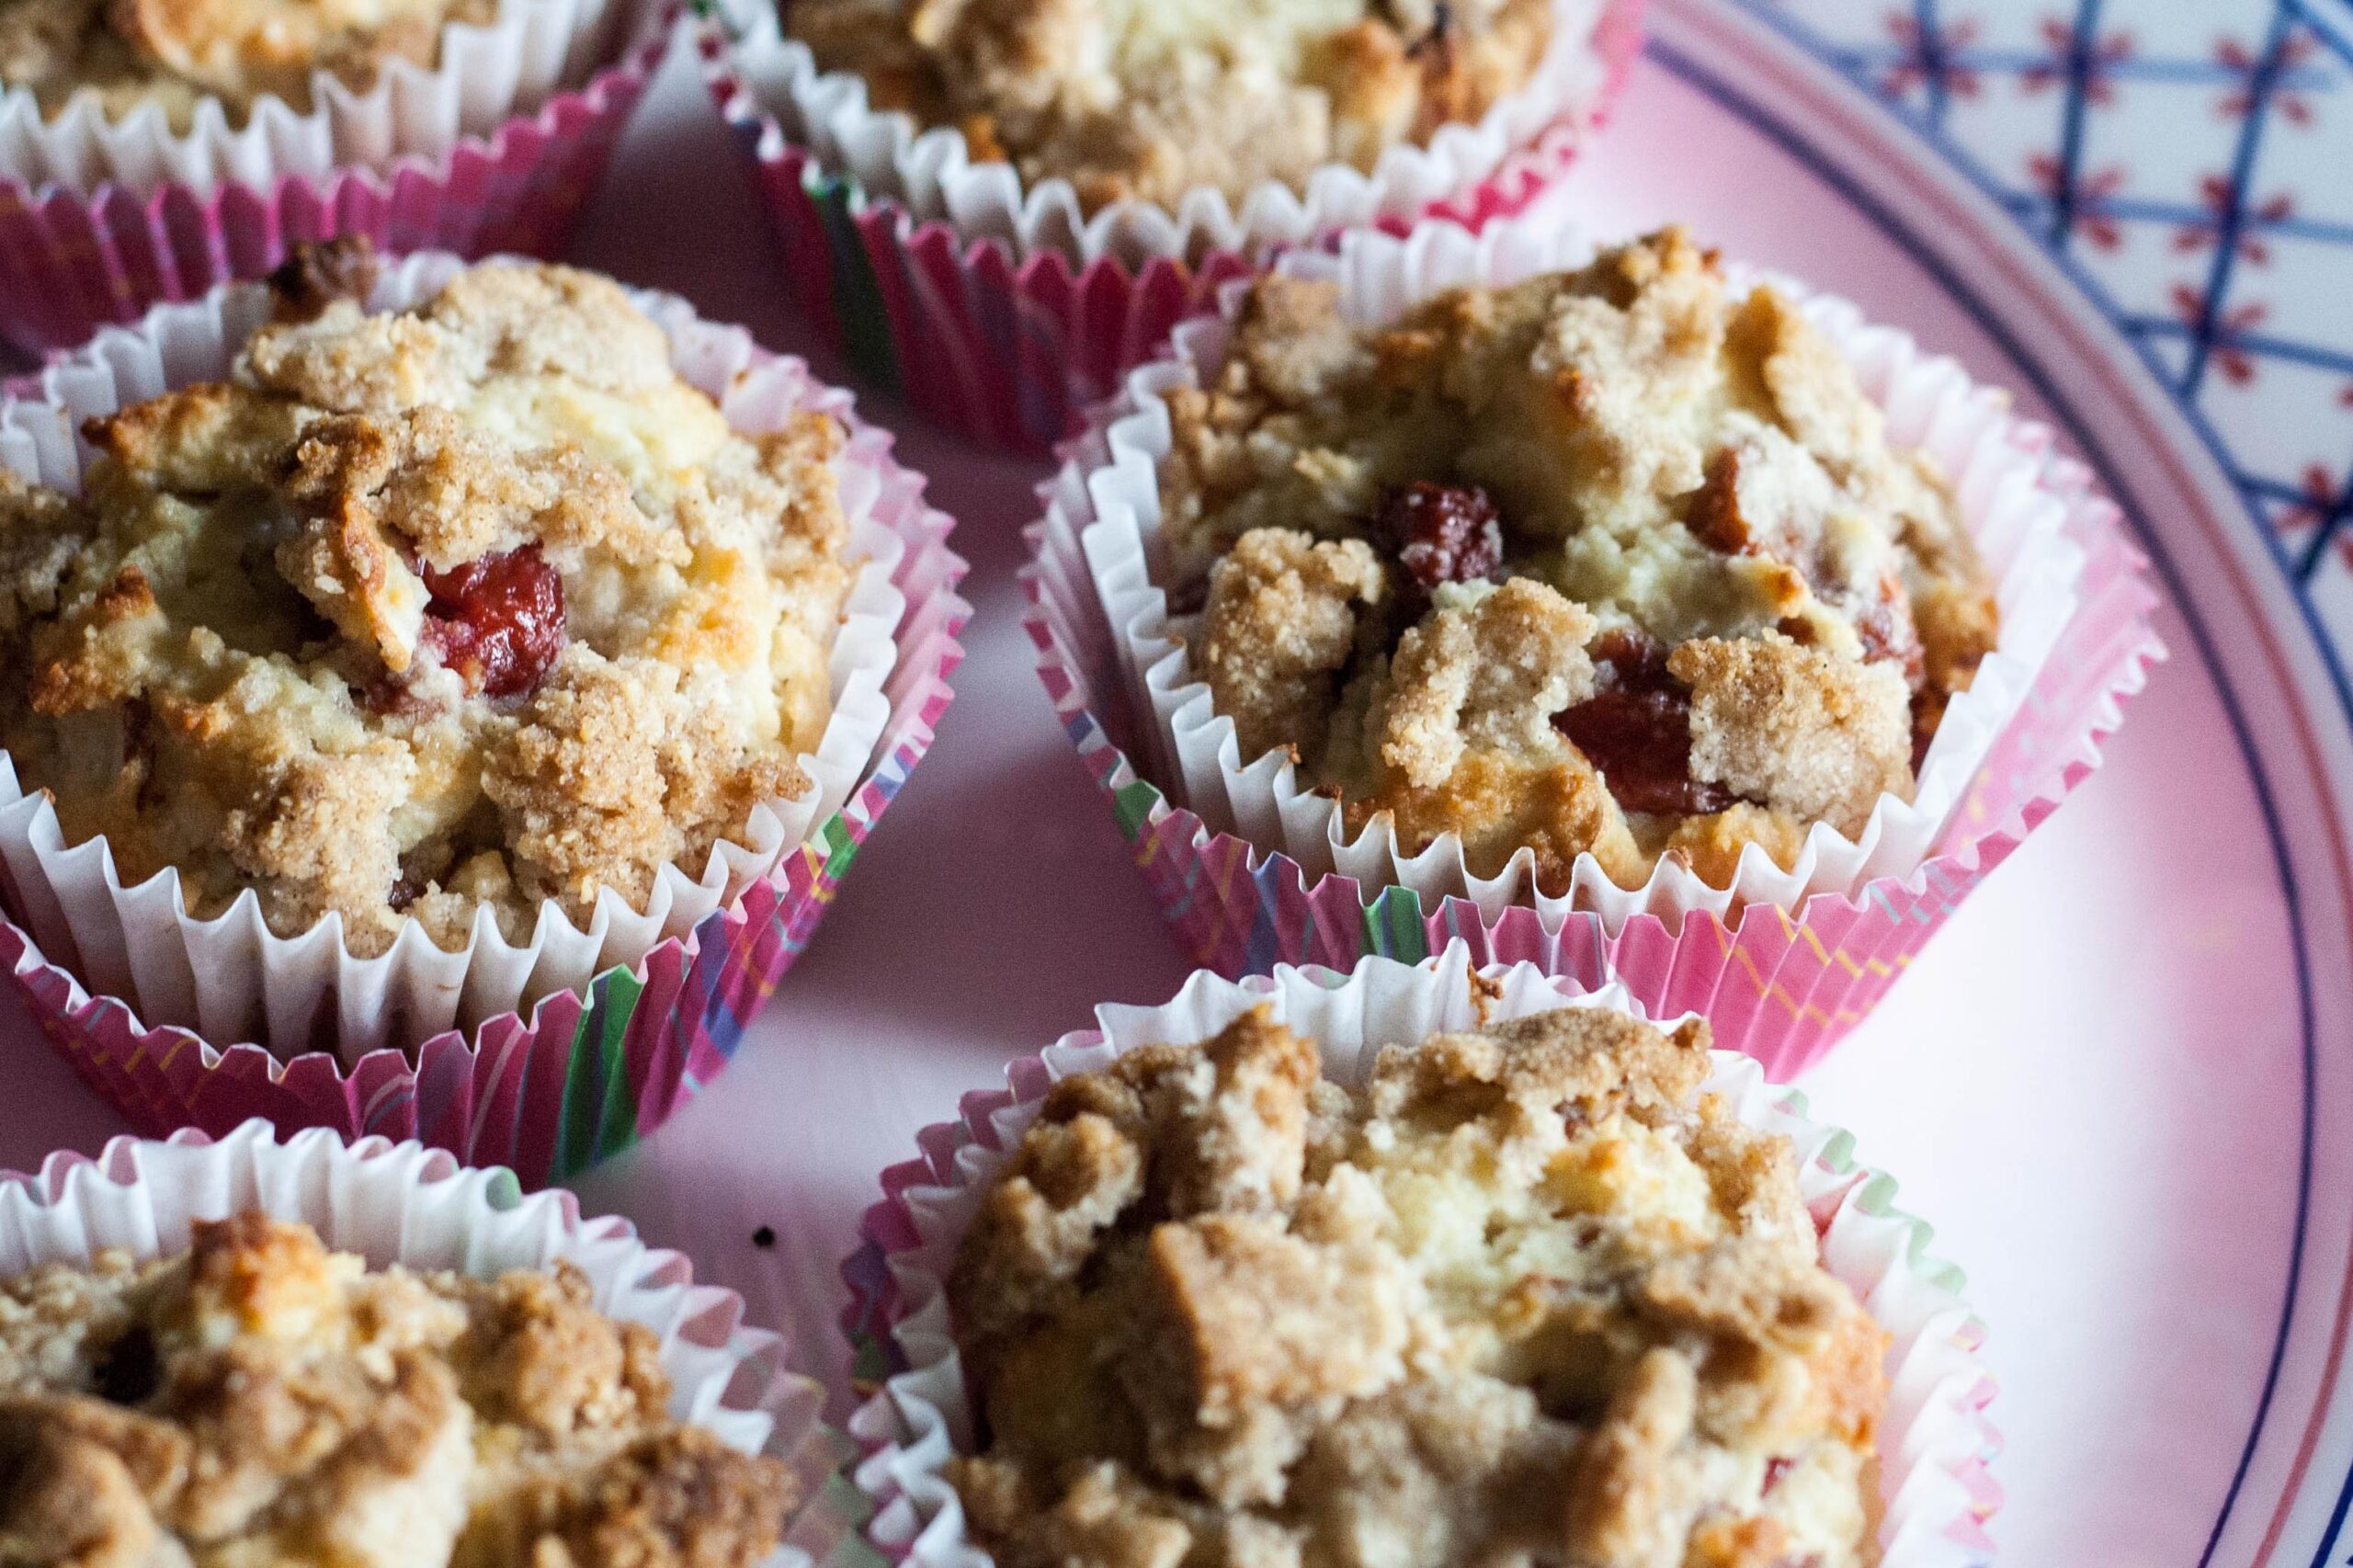  Bursting with juicy cherries, these muffins are bound to be your new favorite!